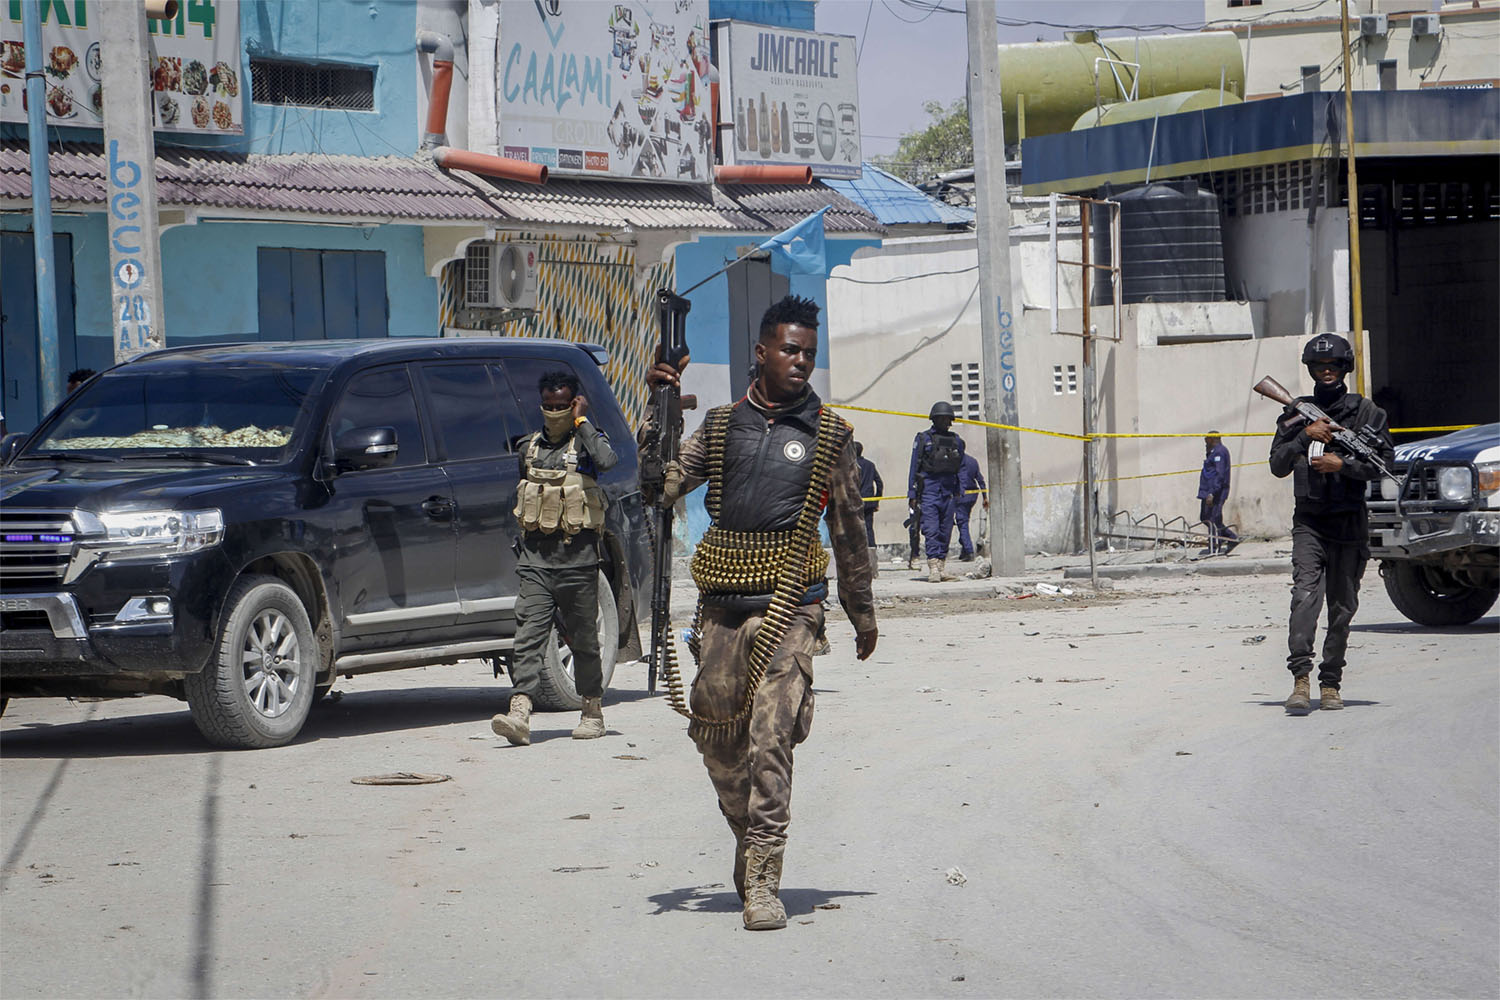 Somalia's military is supported by US troops and drones and an African Union peacekeeping mission